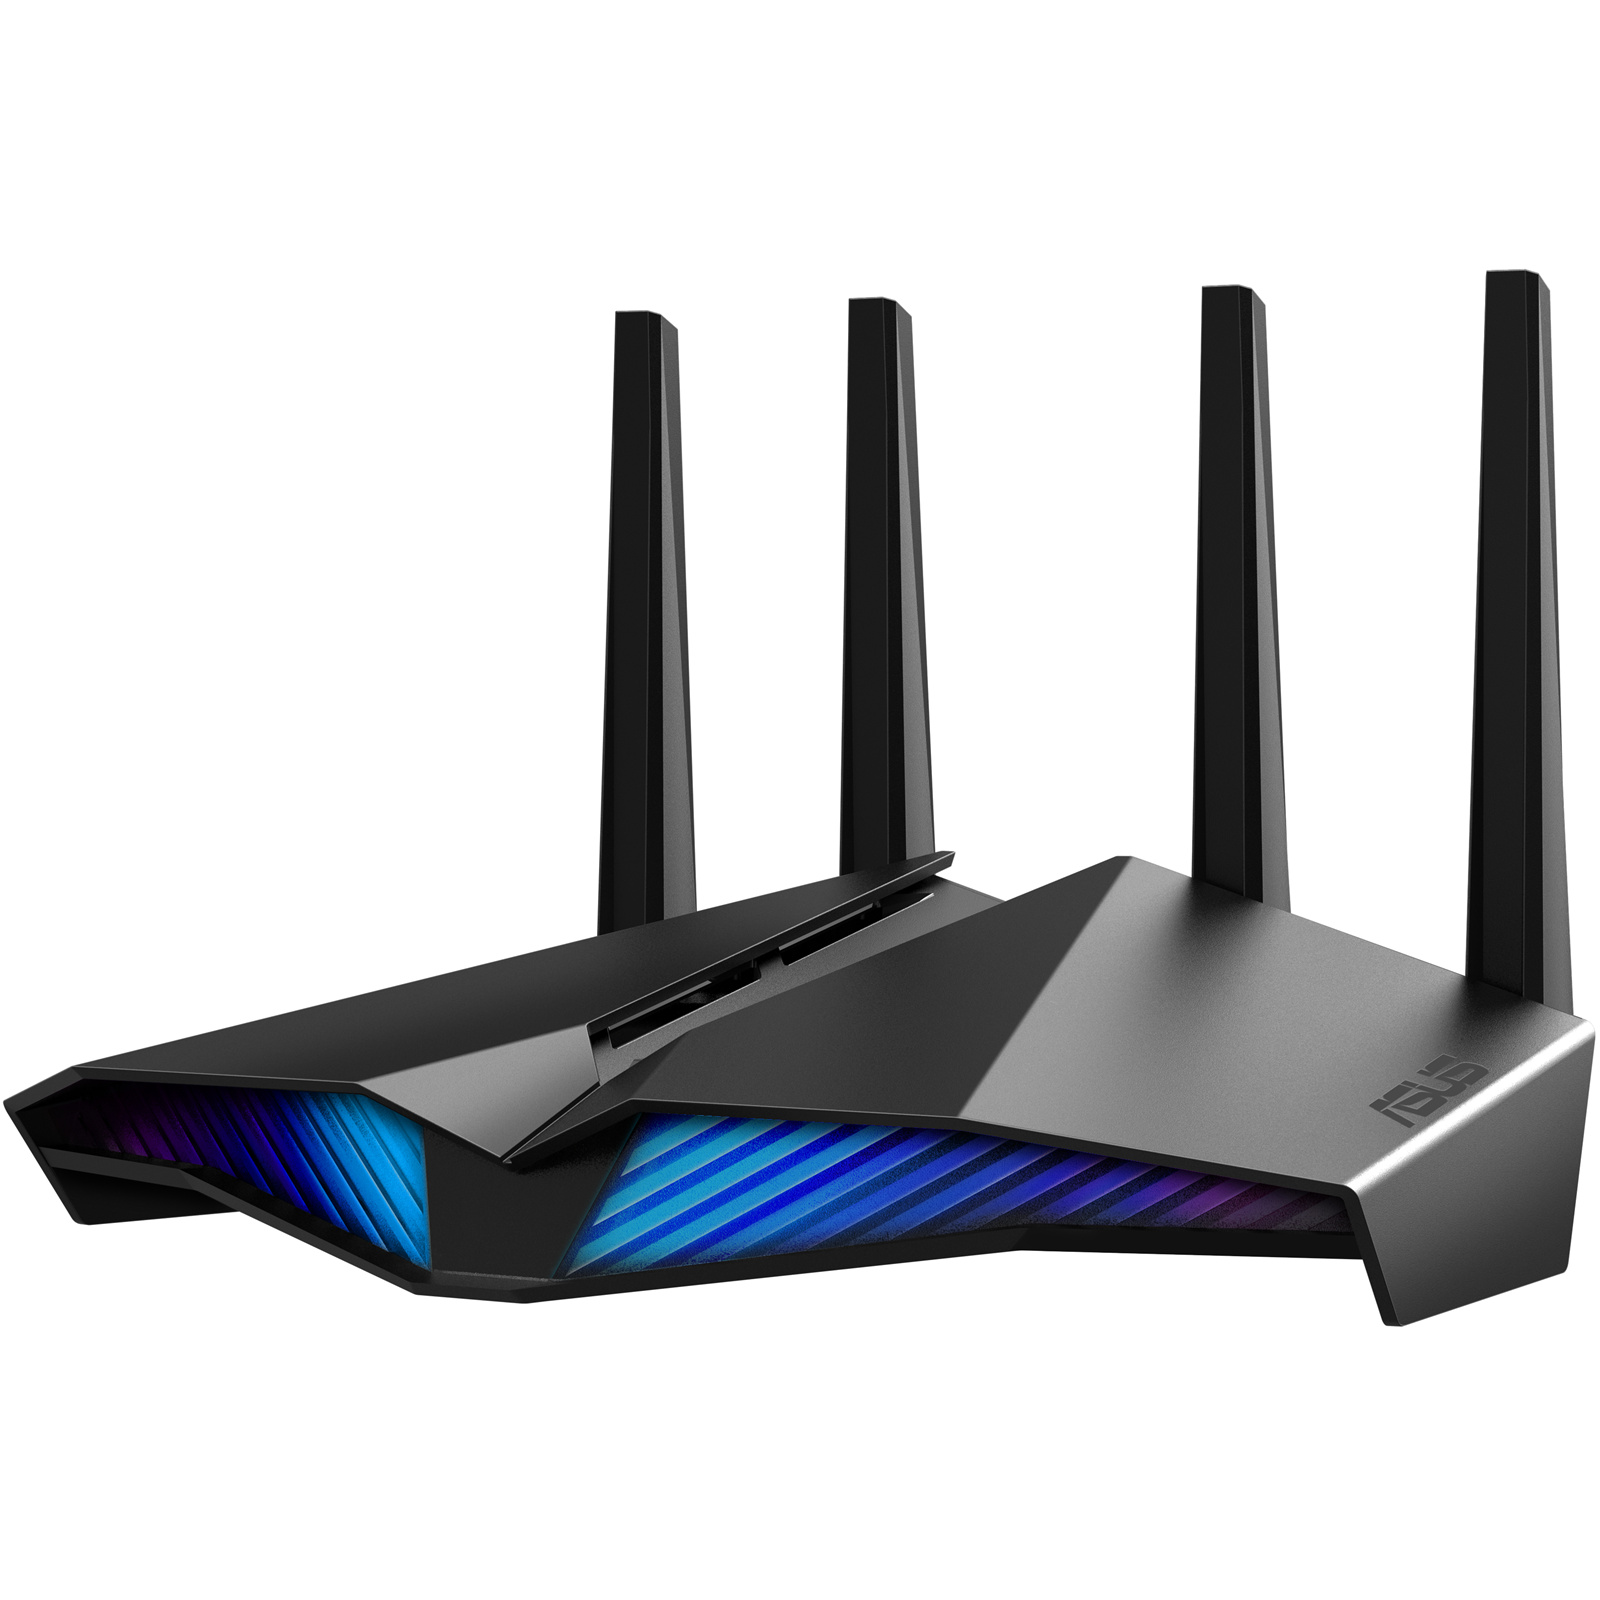 Buy the ASUS RT-AX82U Wi-Fi 6 Gigabit Gaming Router, Dual-Band AX5400, ASUS...  ( RT-AX82U ) online - PBTech.com